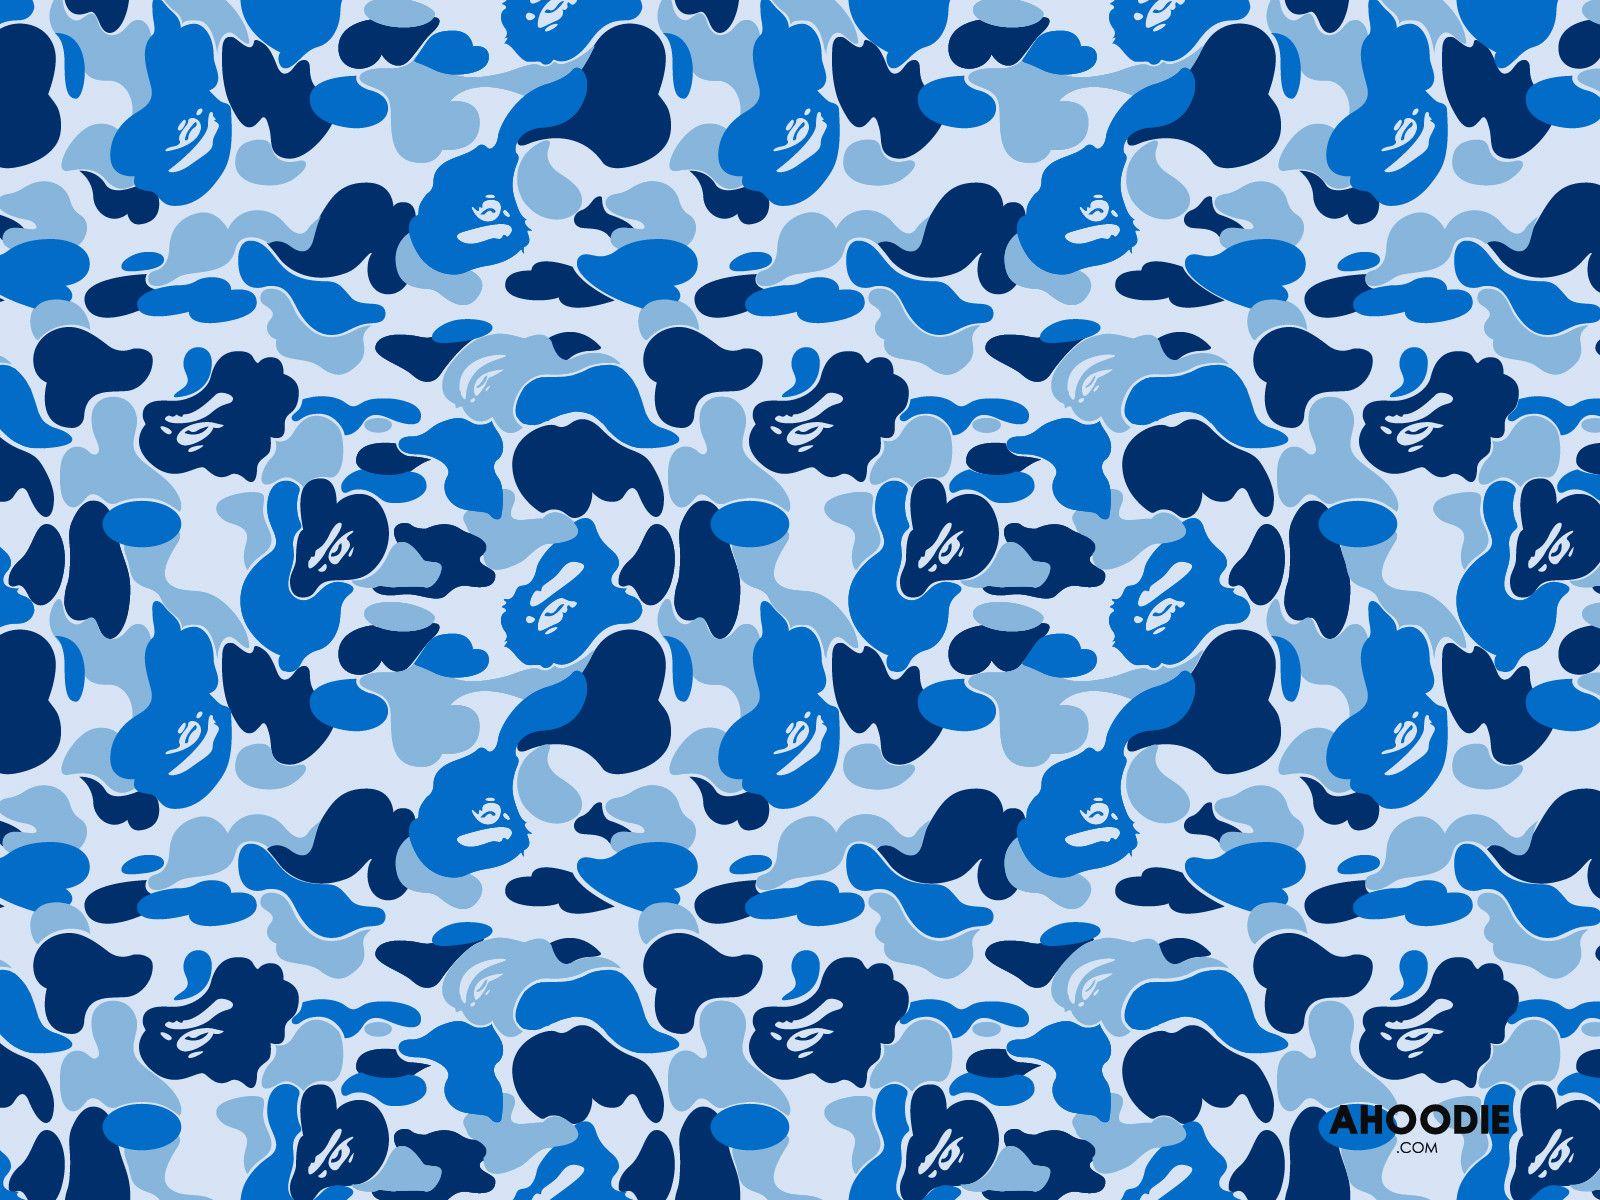 camo wallpaperwallpaper for pc Search Engine